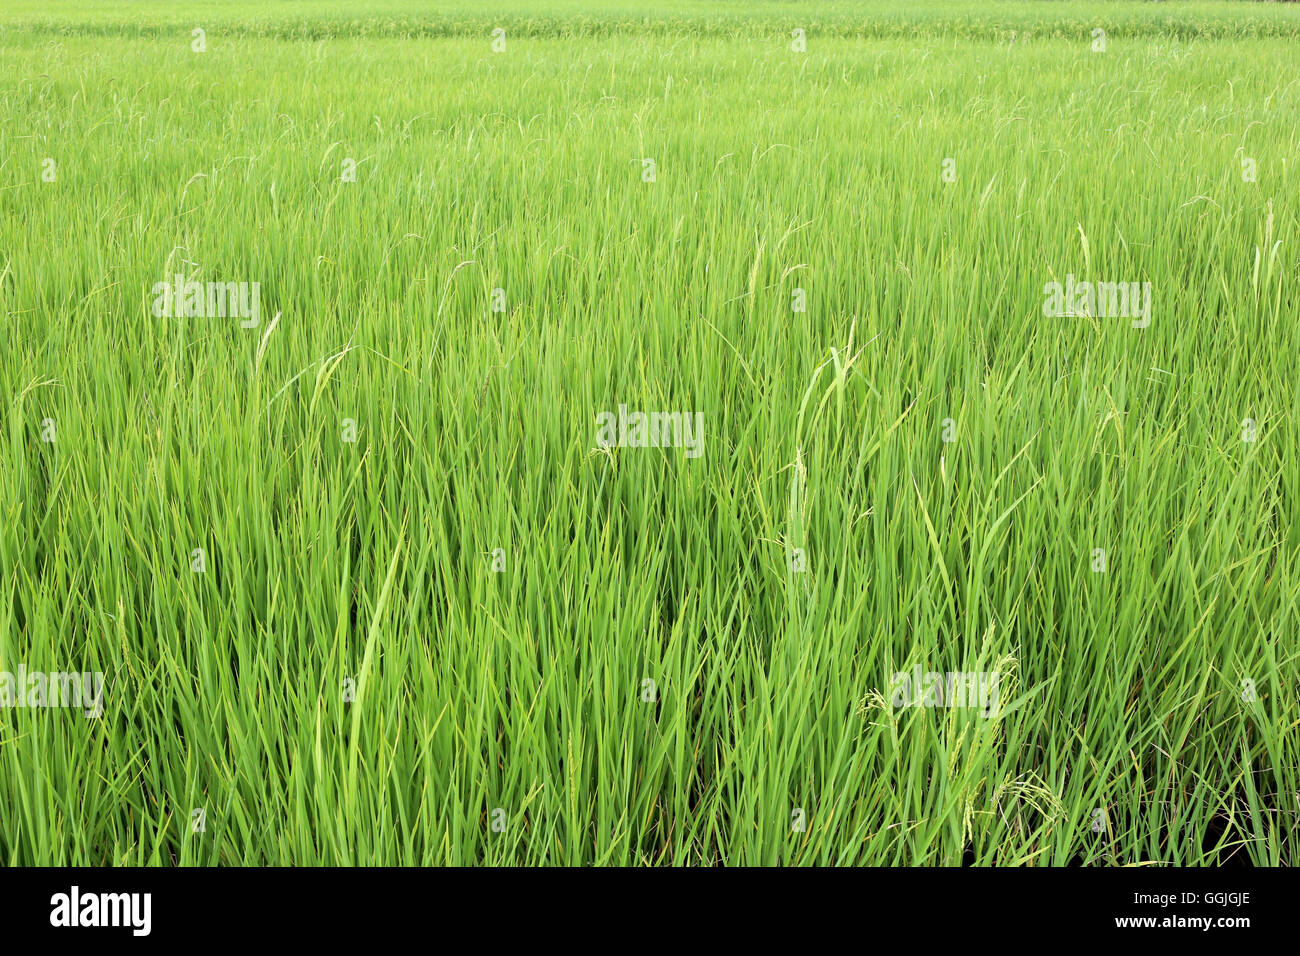 Bright green rice paddies fields in rural areas at Thailand and agriculture of the local population. Stock Photo